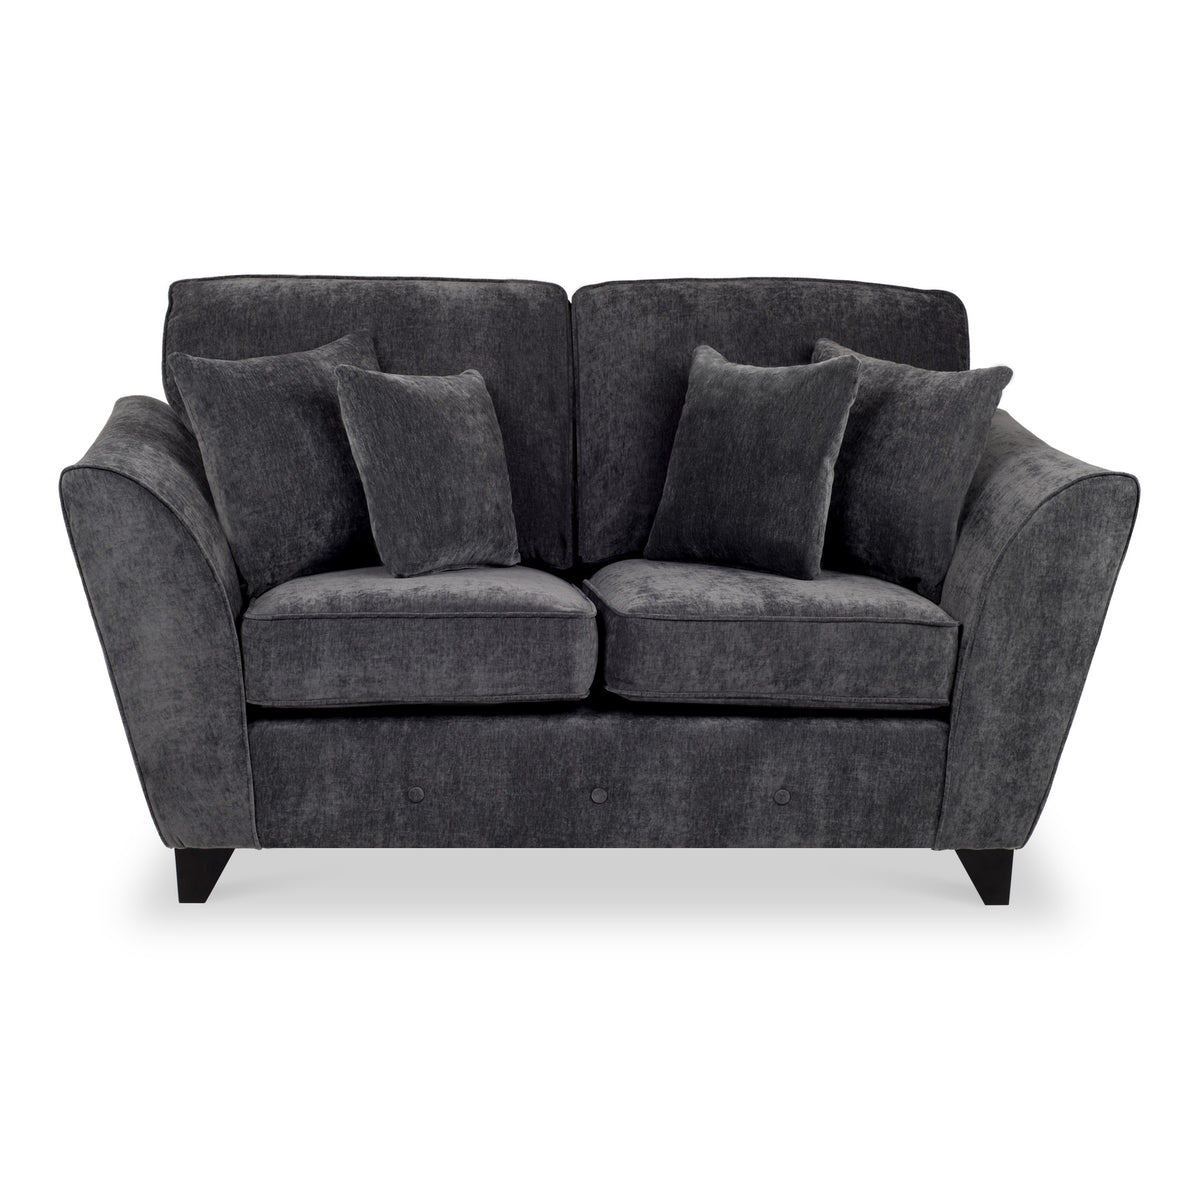 Harris 2 Seater Sofa in Charcoal by Roseland Furniture